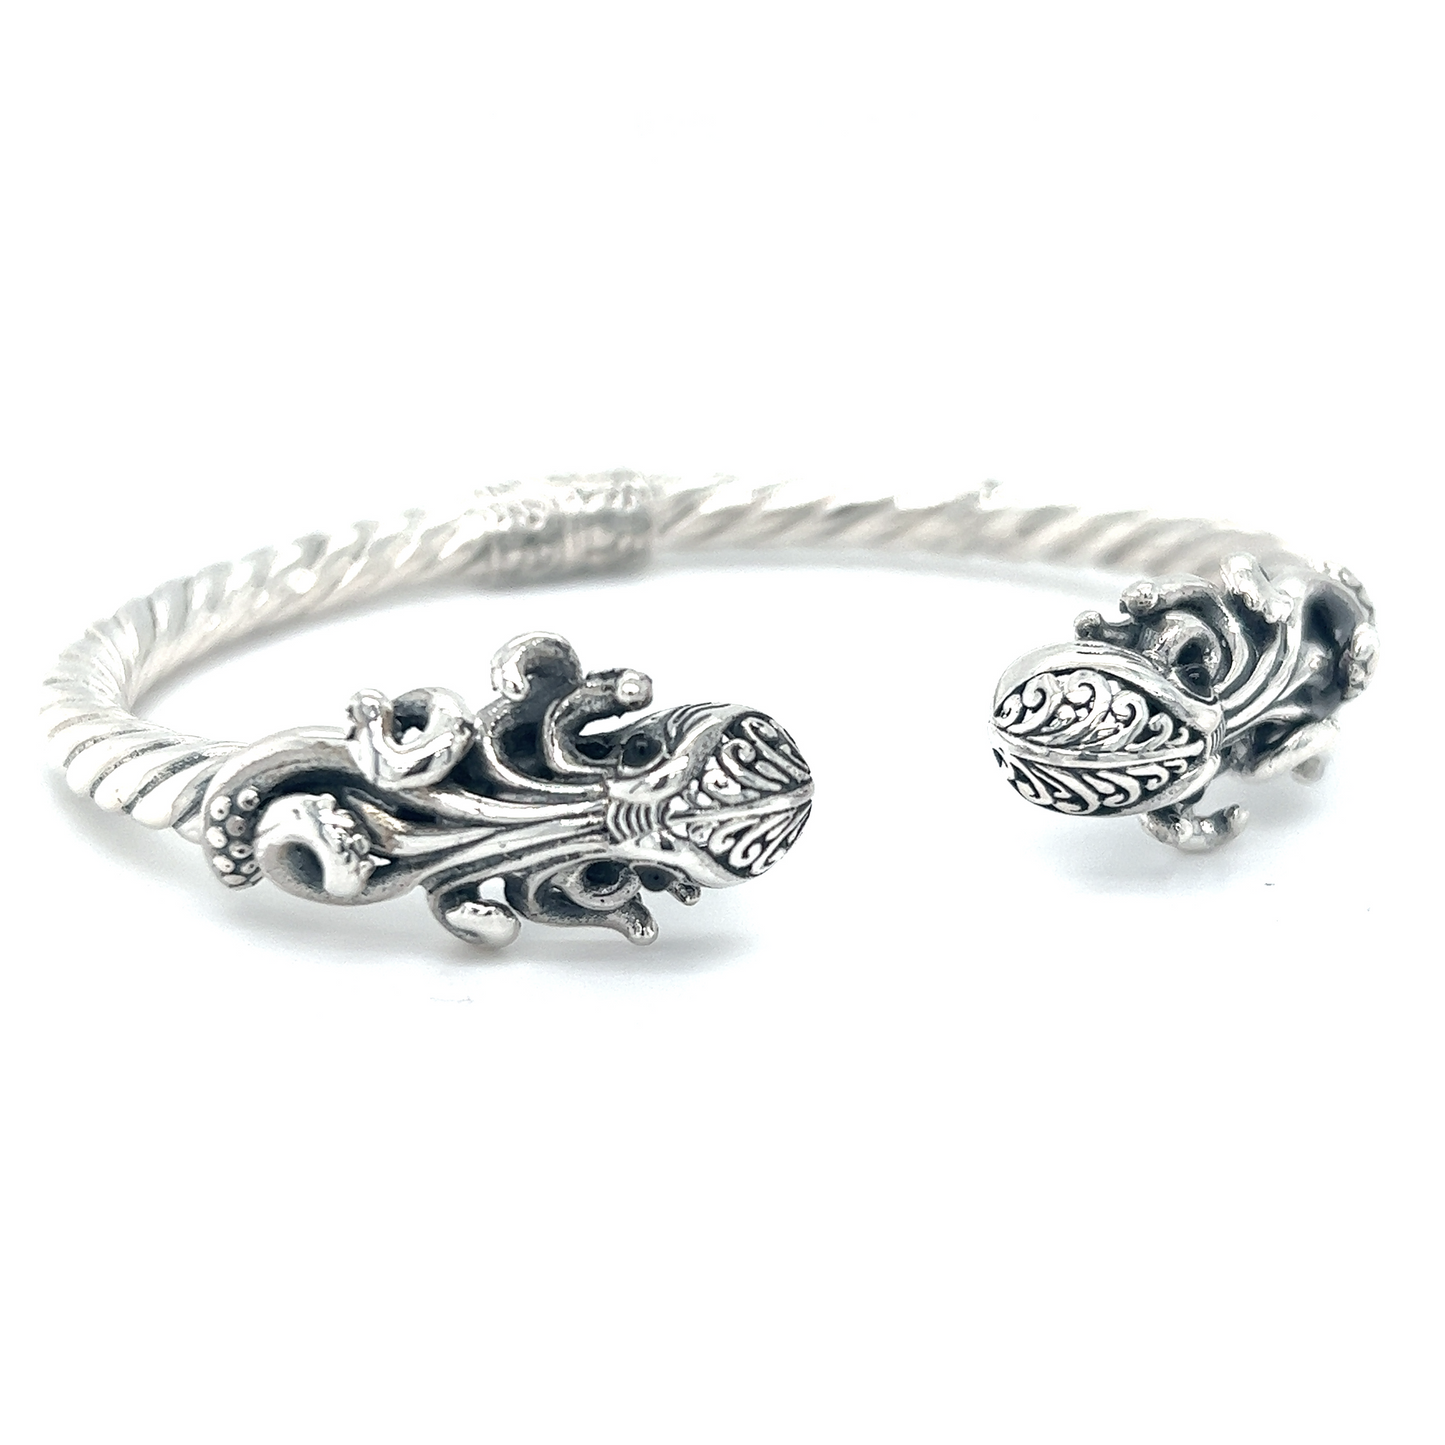 A Twisted Bangle Bracelet with Octopus Ends by Super Silver, with an ornate design.